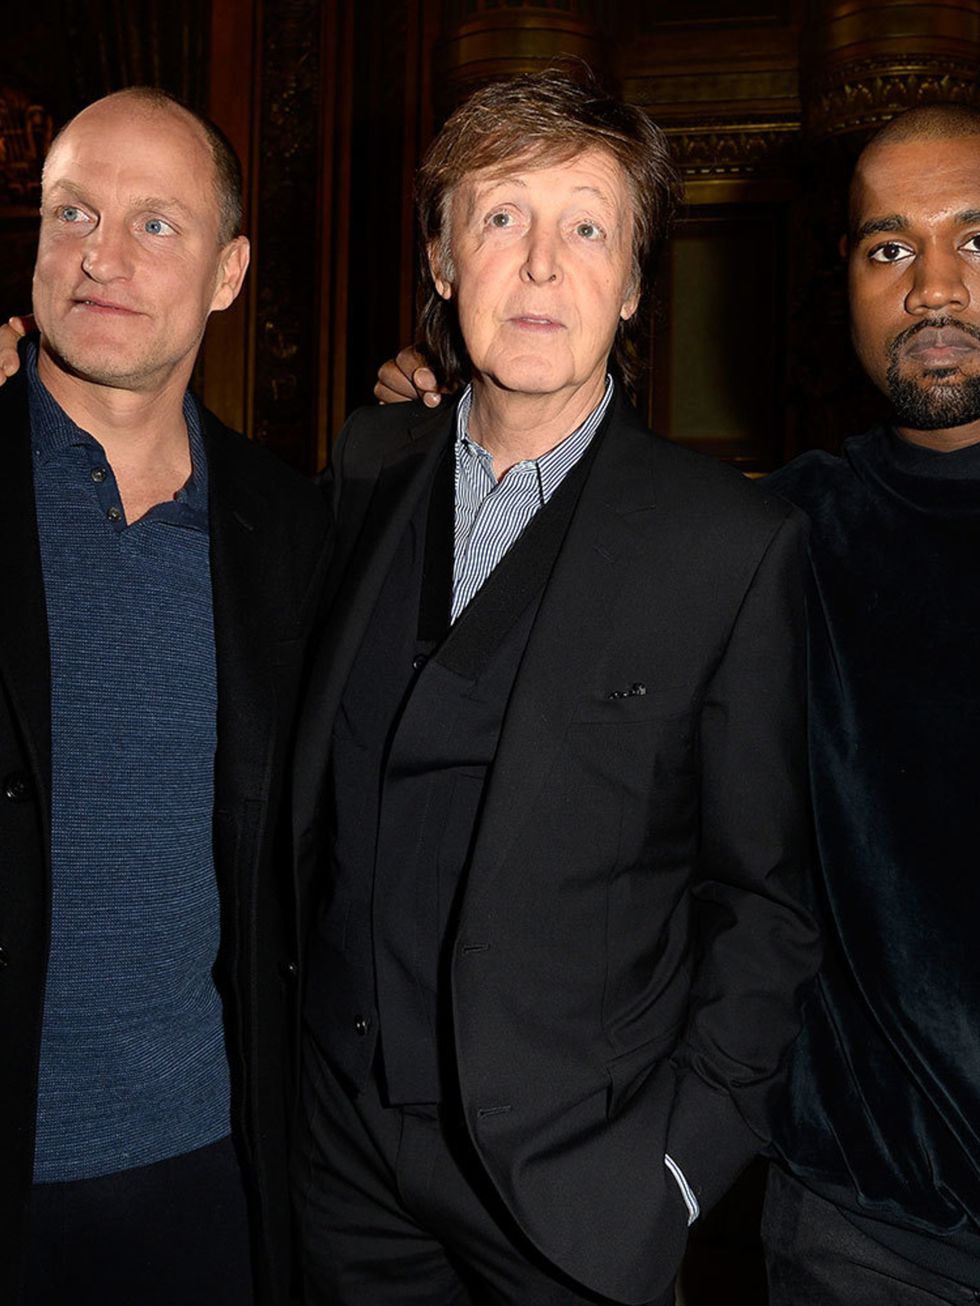 <p>At <a href="http://www.elleuk.com/fashion/trends/presentation-of-stella-mccartney-autumn-2015-collection-pictures">Stella McCartney a/w 2015</a>: A Kanye is a unisex accessory. Sir Paul and Woody say so.</p>